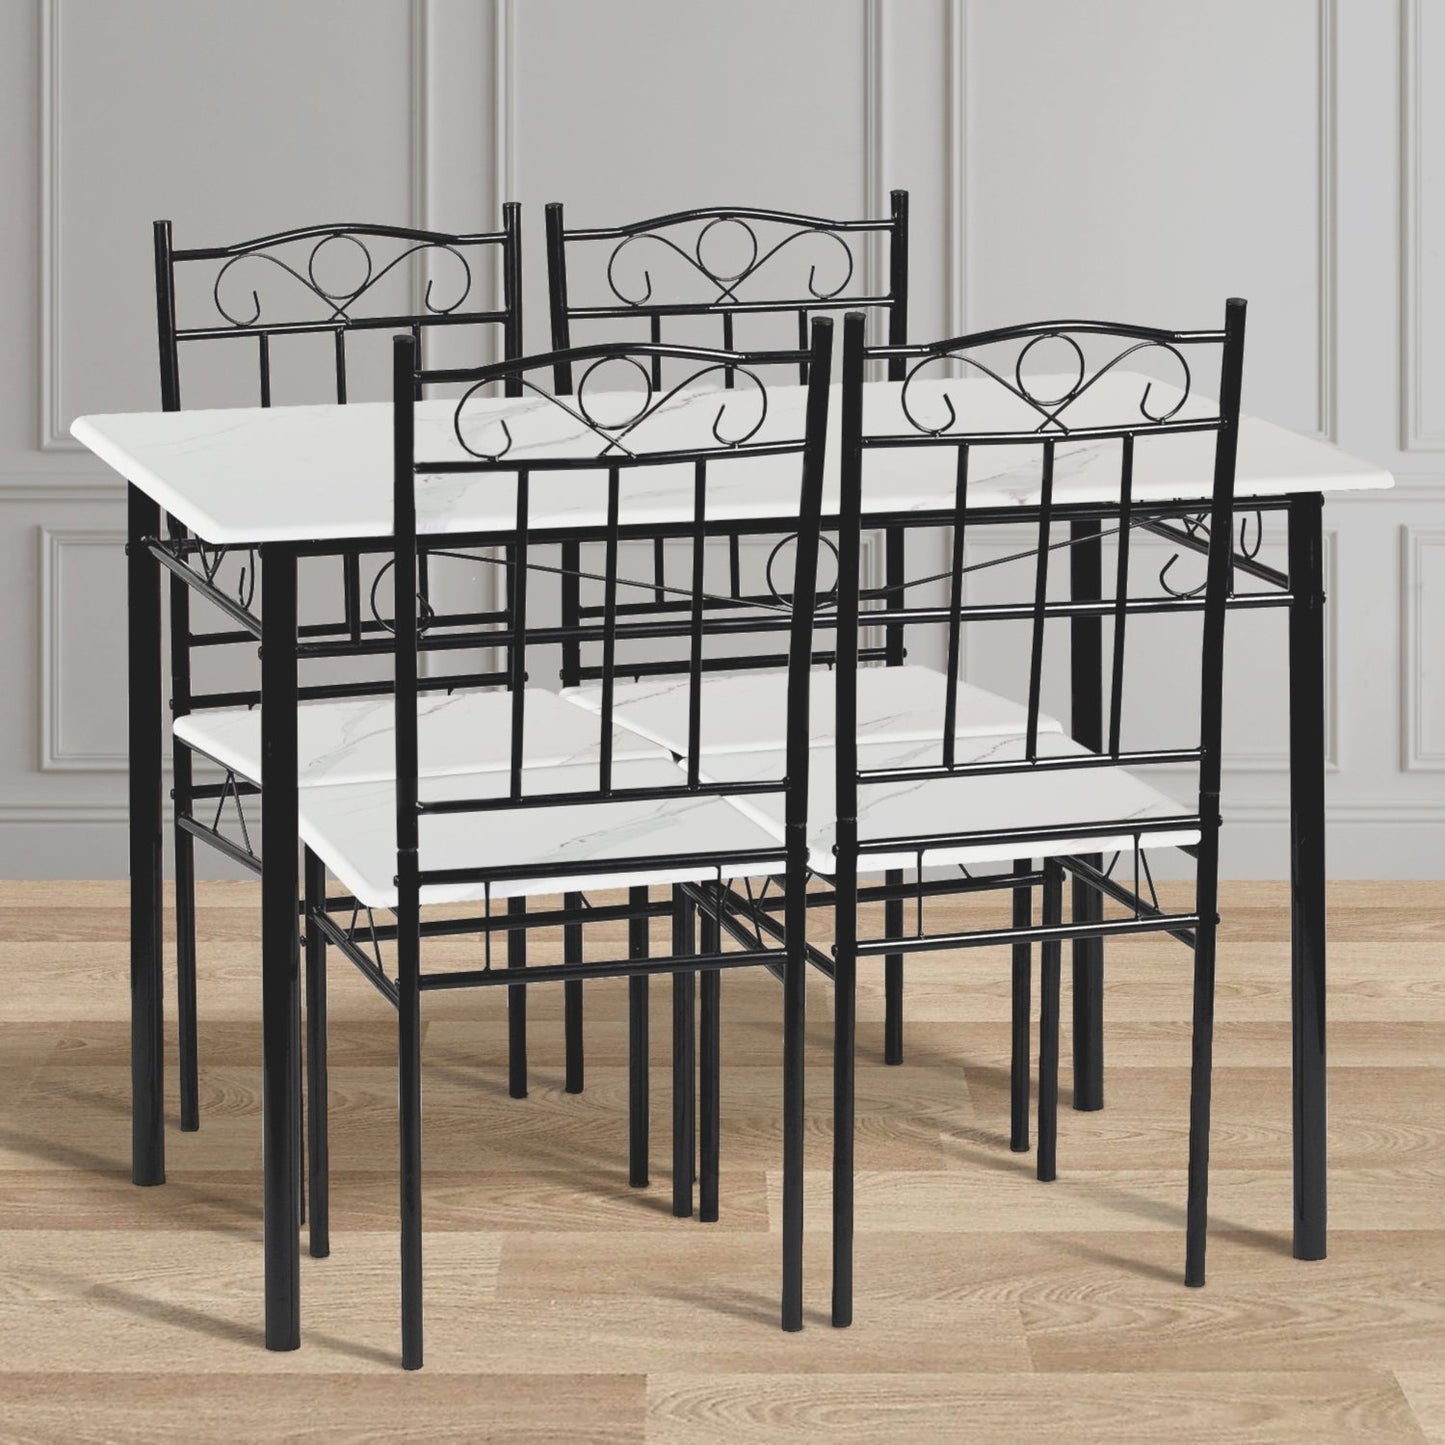 NORSEMAN Marbling Dining Table with 4 Chairs Set - 109*69*75cm - White/Black/Light Brown